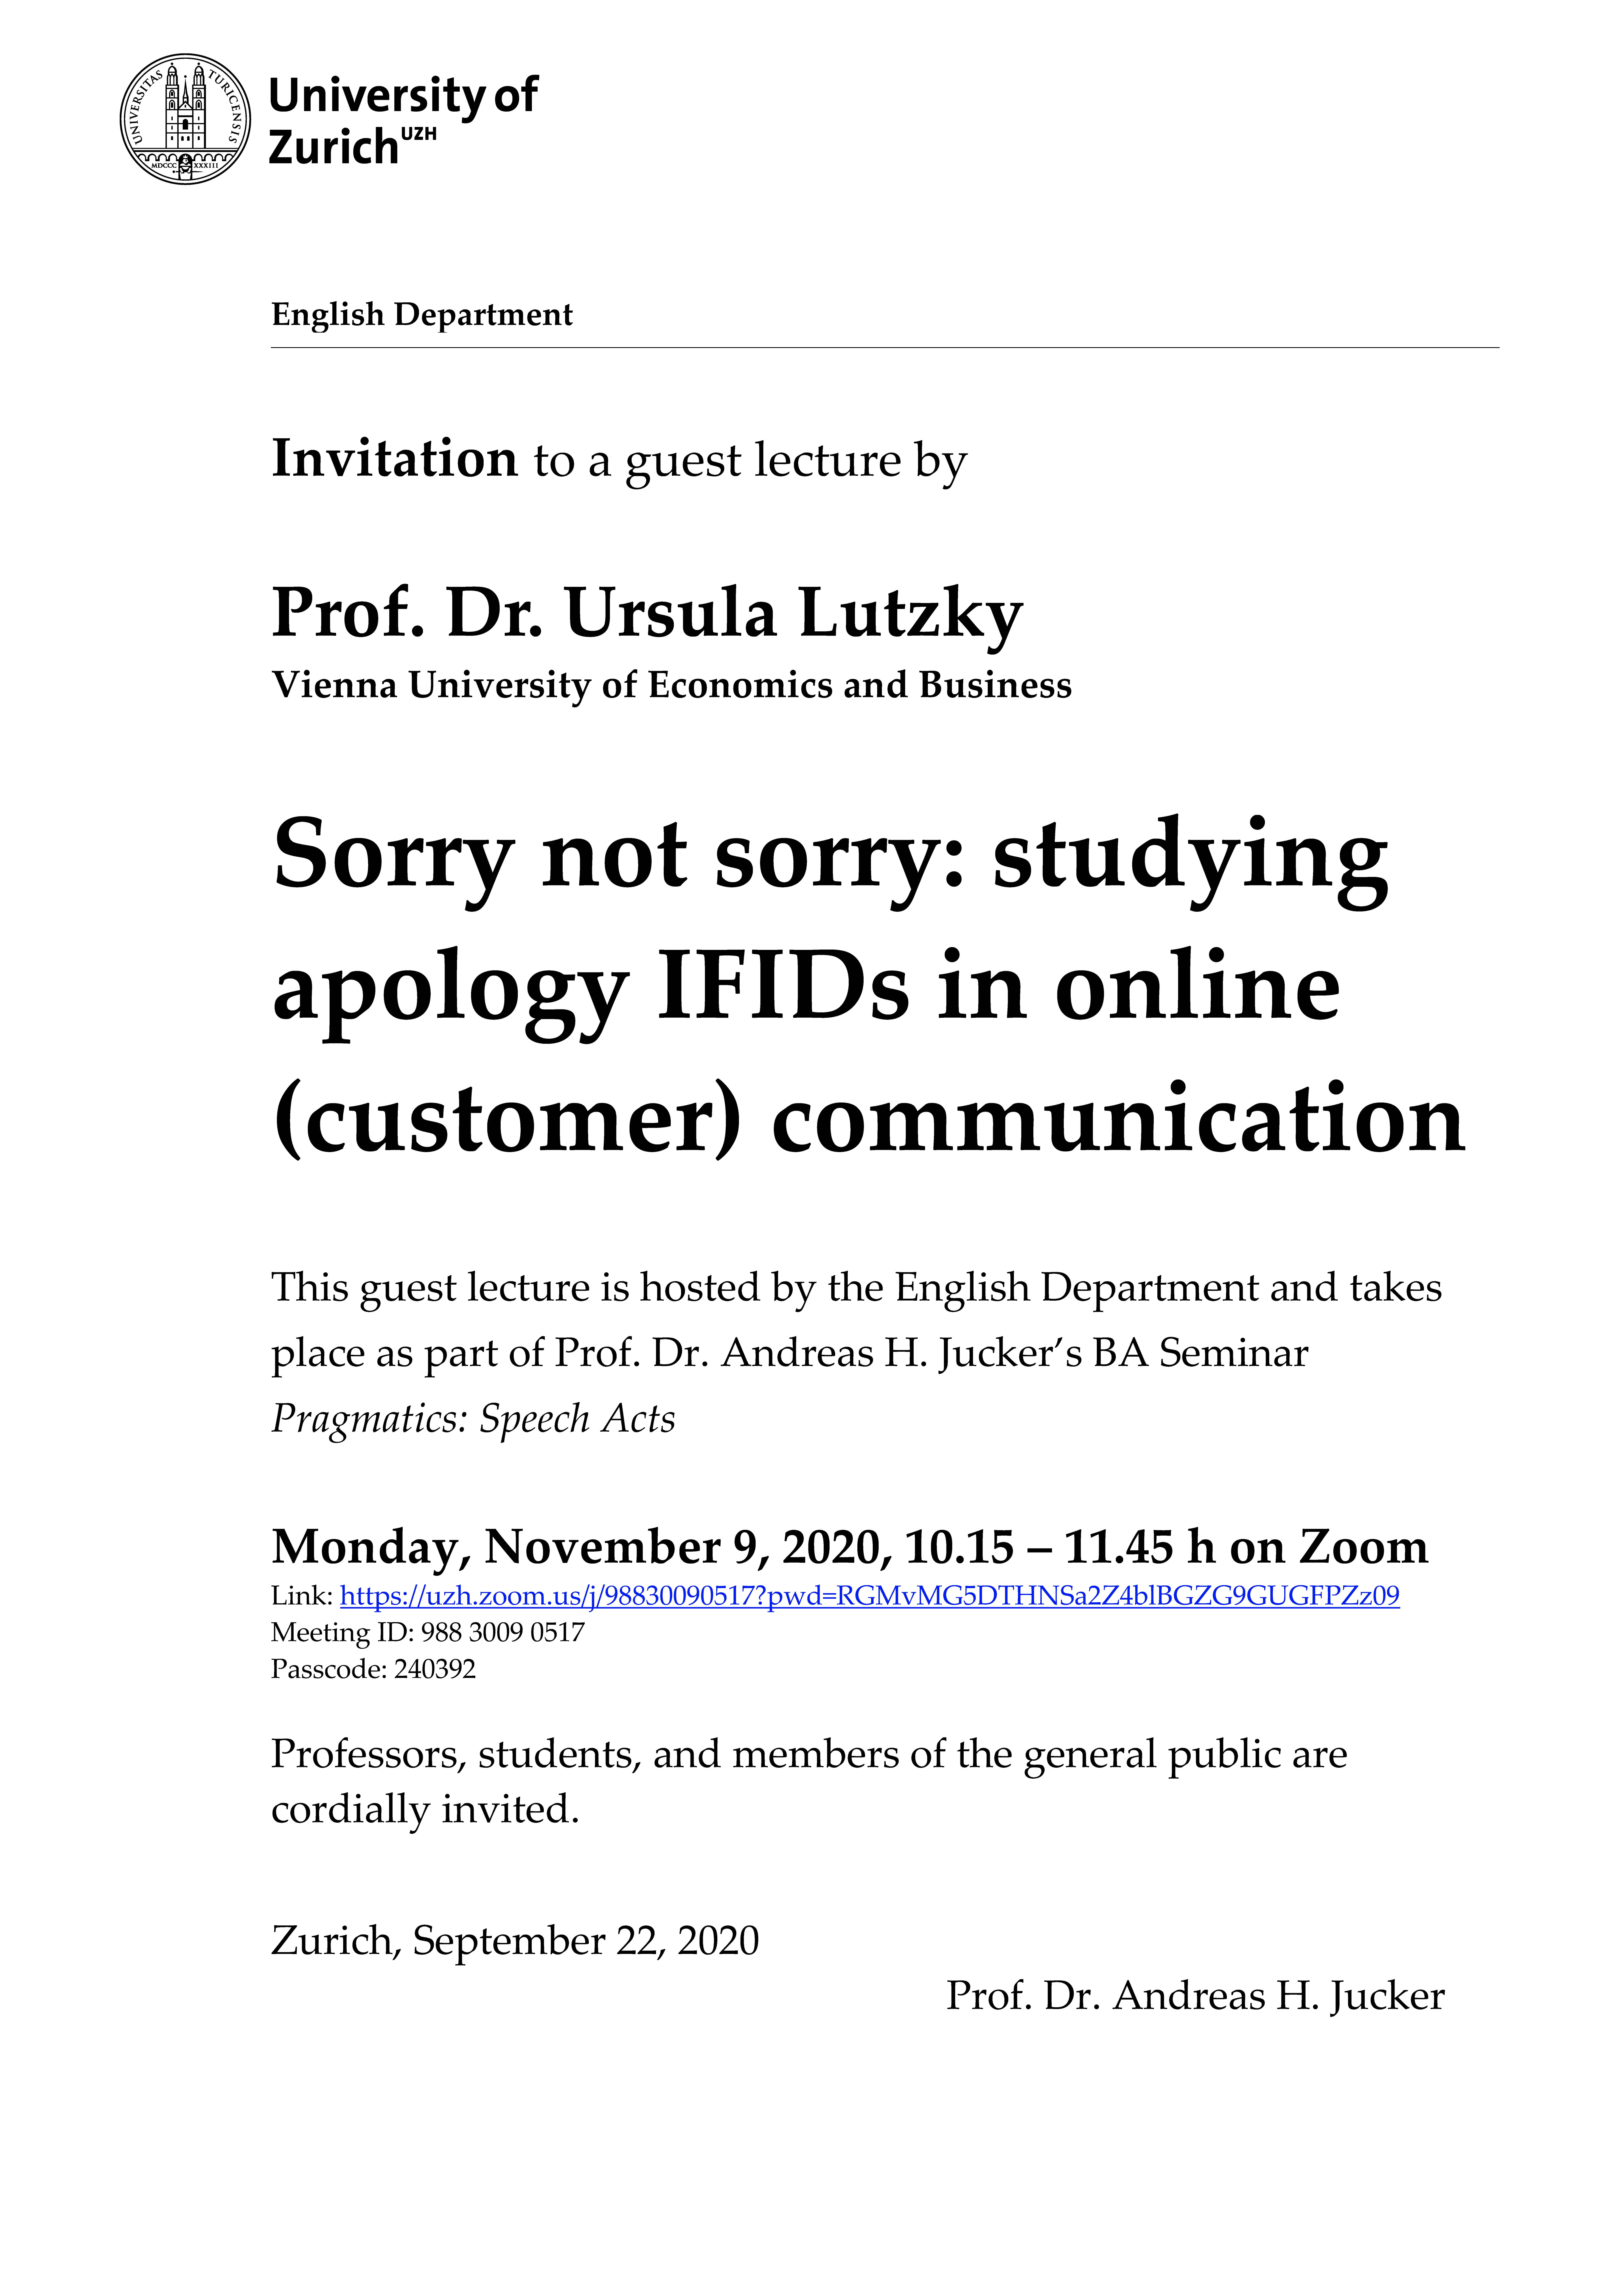 Prof. Dr. Ursula Lutzky _ Sorry not sorry: studying apology IFIDs in online (customer) communication